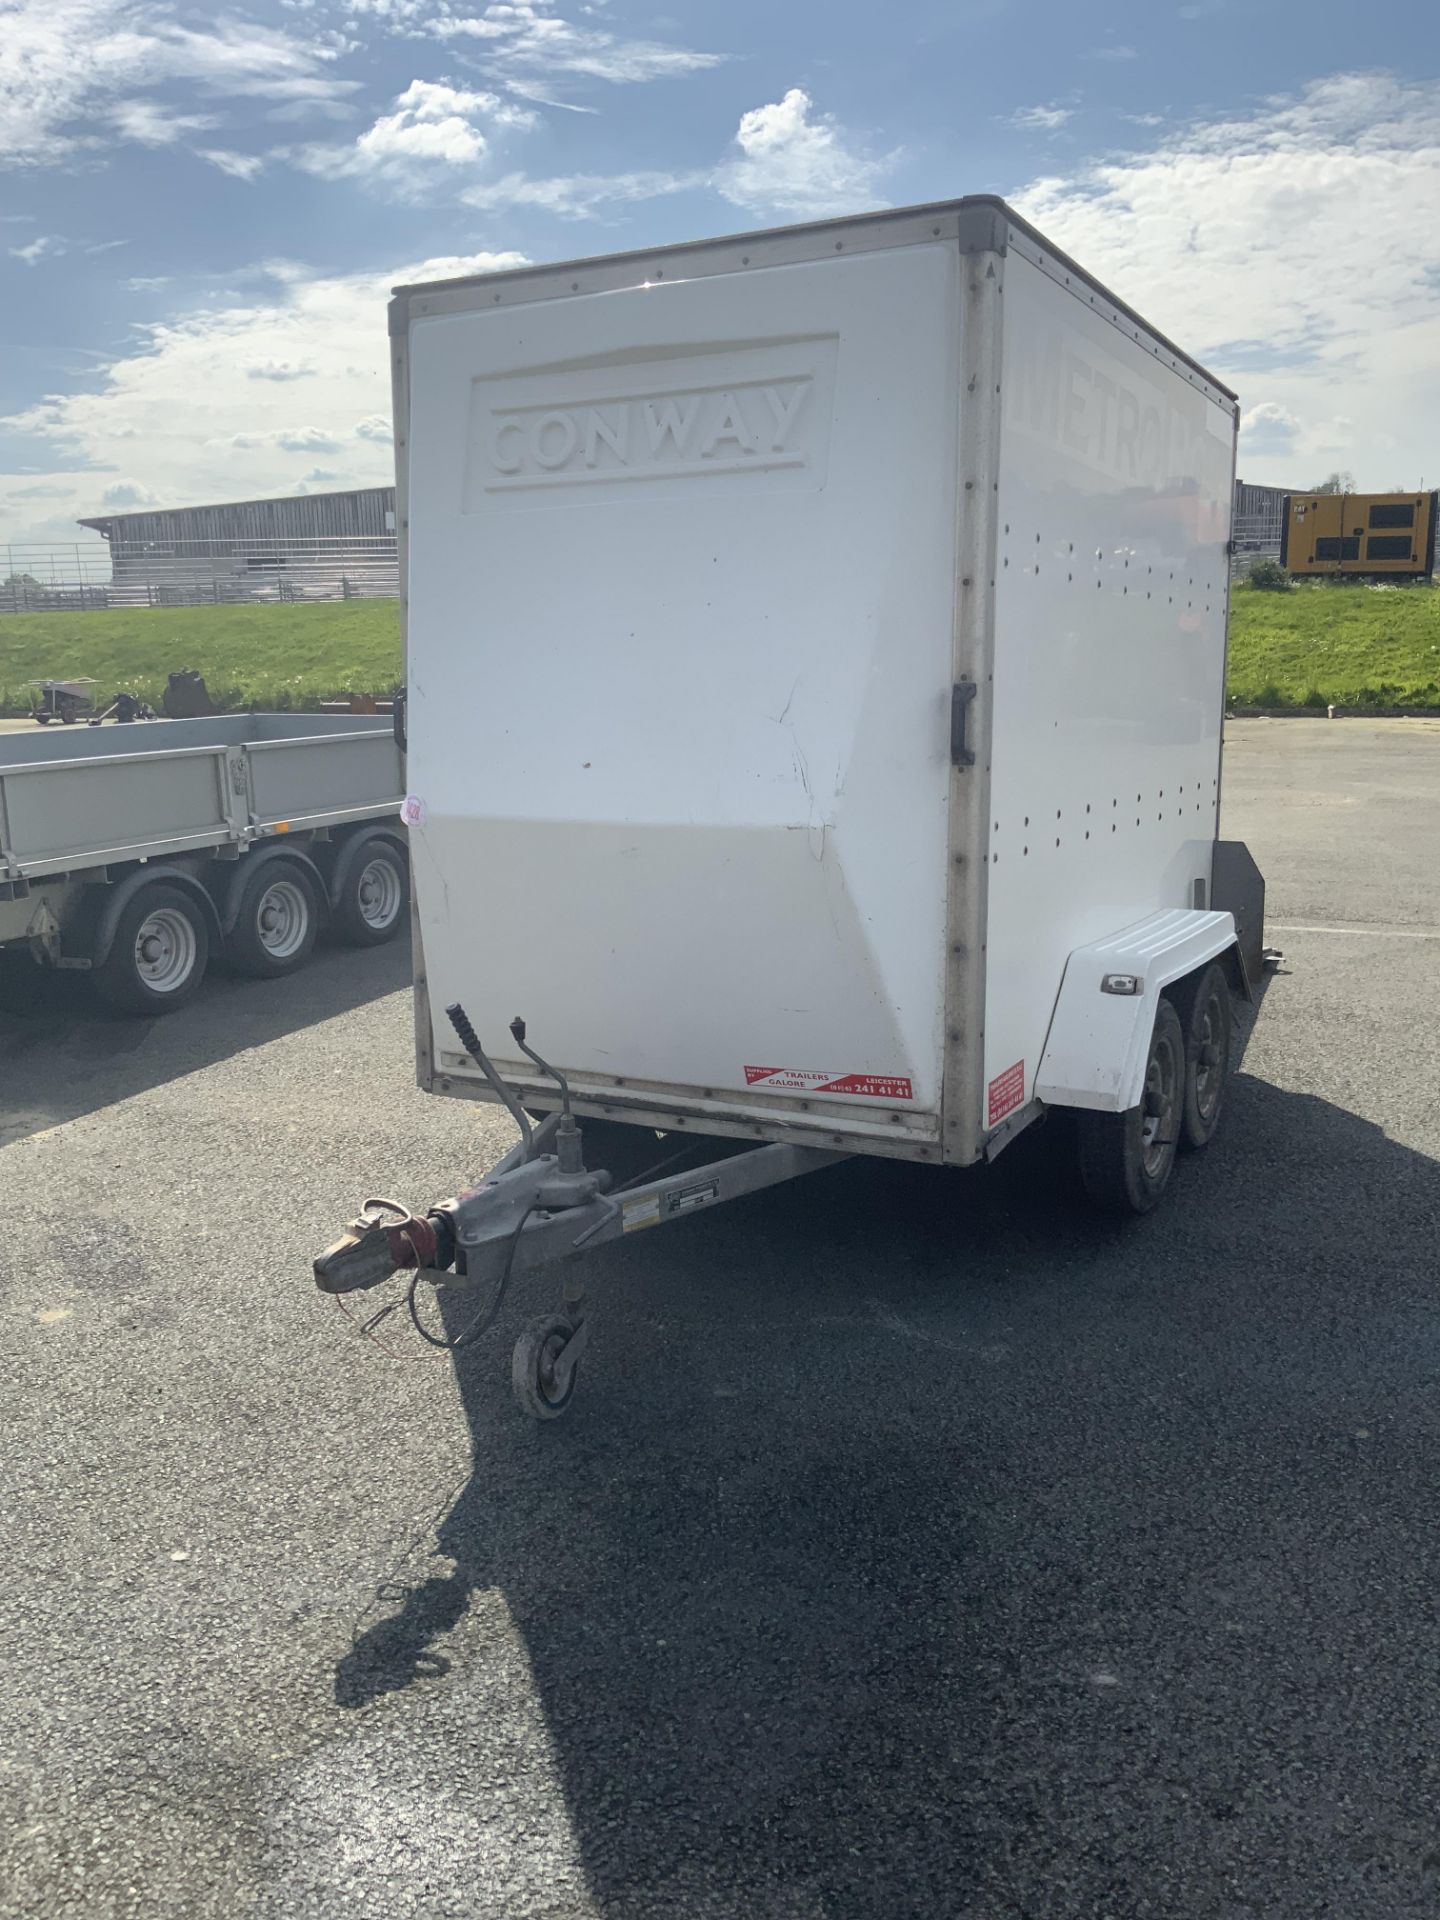 TWIN AXLE BOX TRAILER WITH REAR RAMPS